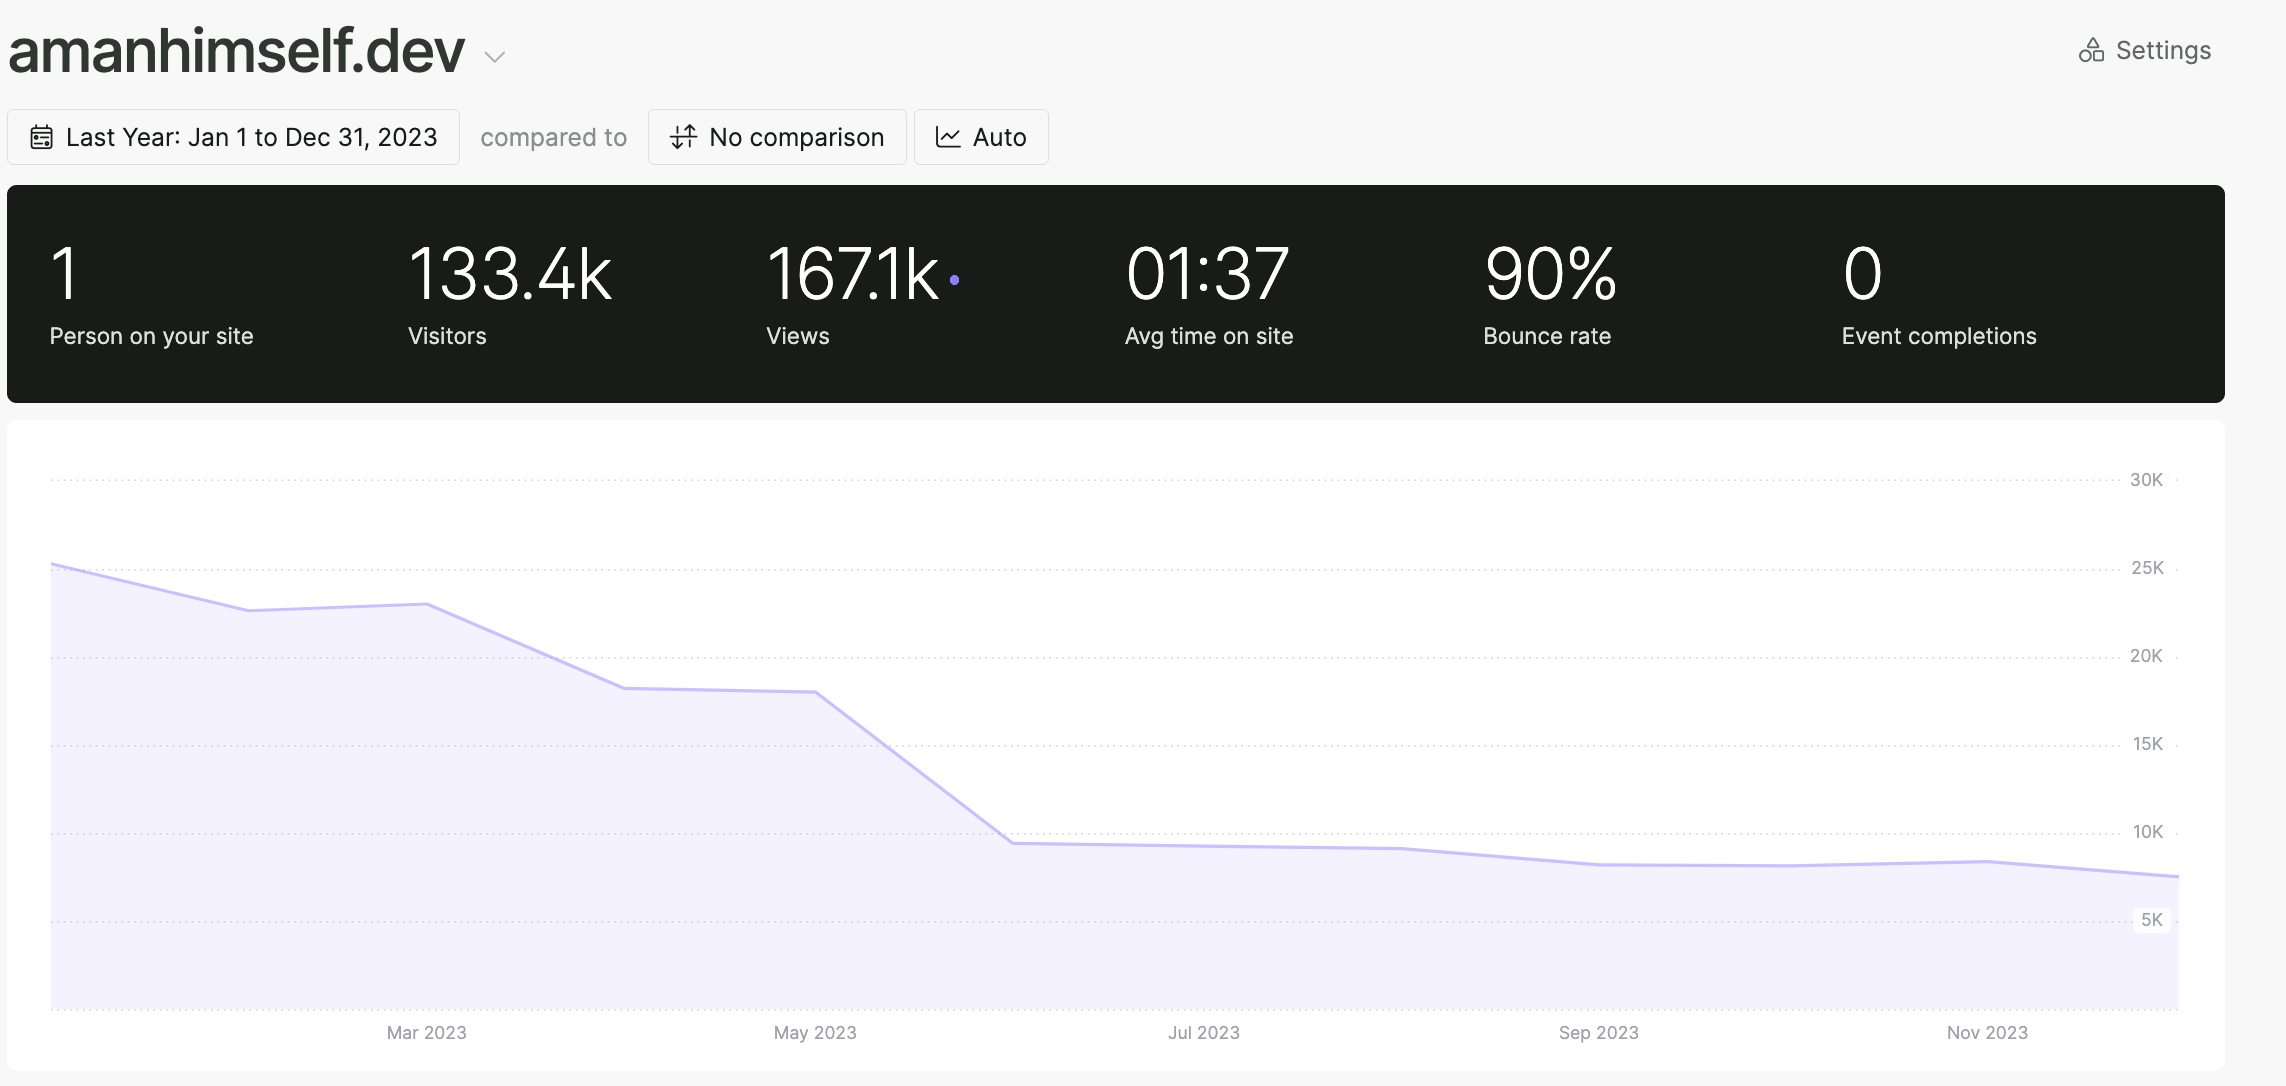 Yearly blog stats